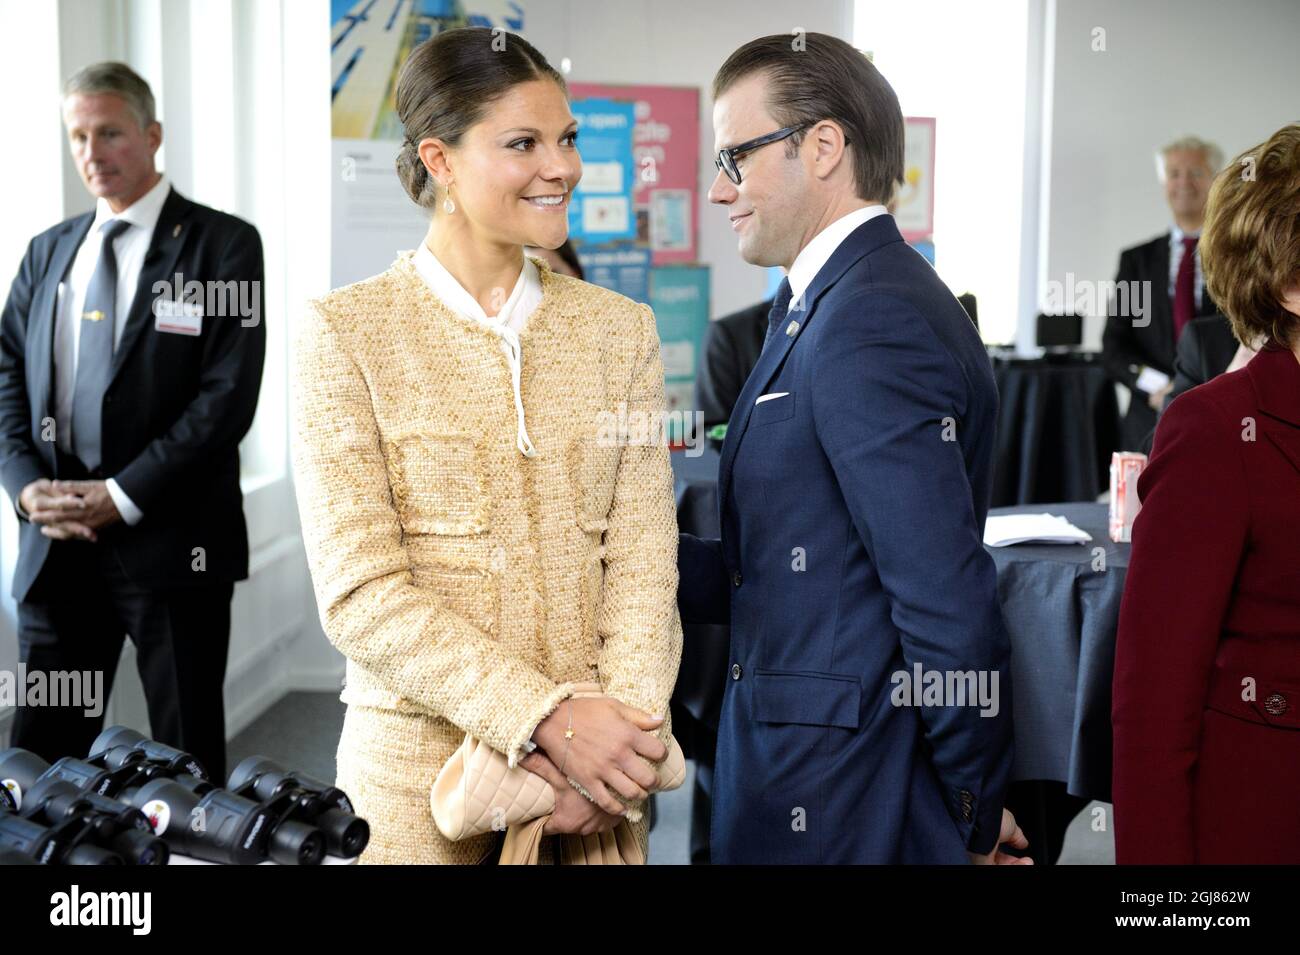 LUND 2013-10-03 Crown Princess Victoria and Prince Daniel are seen during a visit to Ideon Gateway in Lund, Sweden, October 3, 2013. The Crown Princess couple accompanied President Anibal Cavaco Silva and his wife Maria. The Ideon Gateway is a model for building a city part designed for research and innovation. The President of Portugal is on a State visit to Sweden. Foto: Ludvig Thunman / TT / Kod 10600  Stock Photo